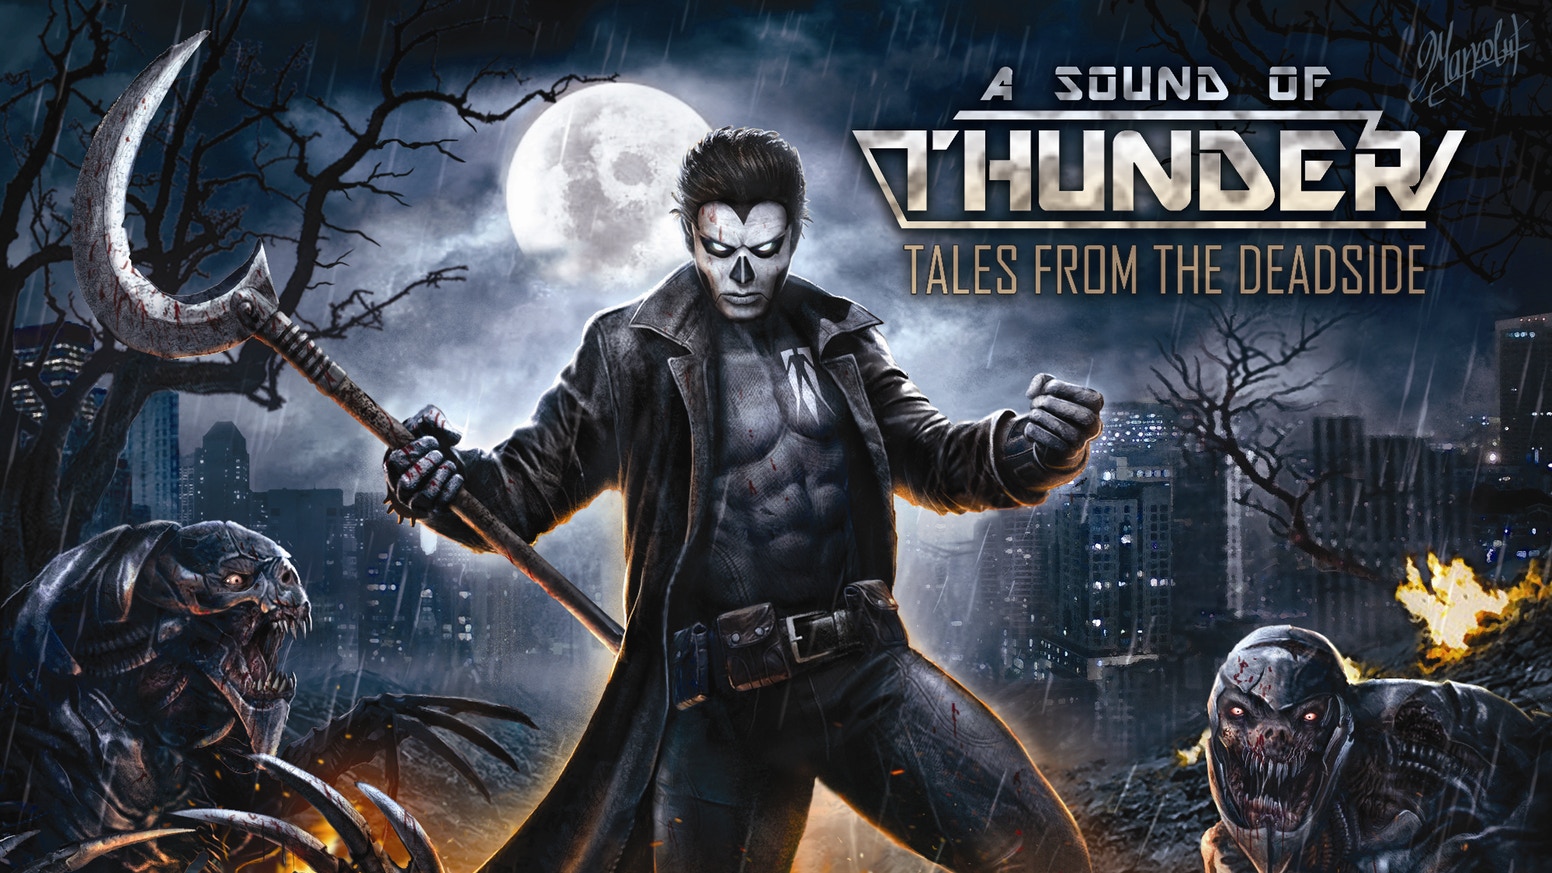 Tales from the far. Shadowman комикс. A Sound of Thunder 2015 - Tales from the Deadside. Вэлиант вампир. Deadside замес.